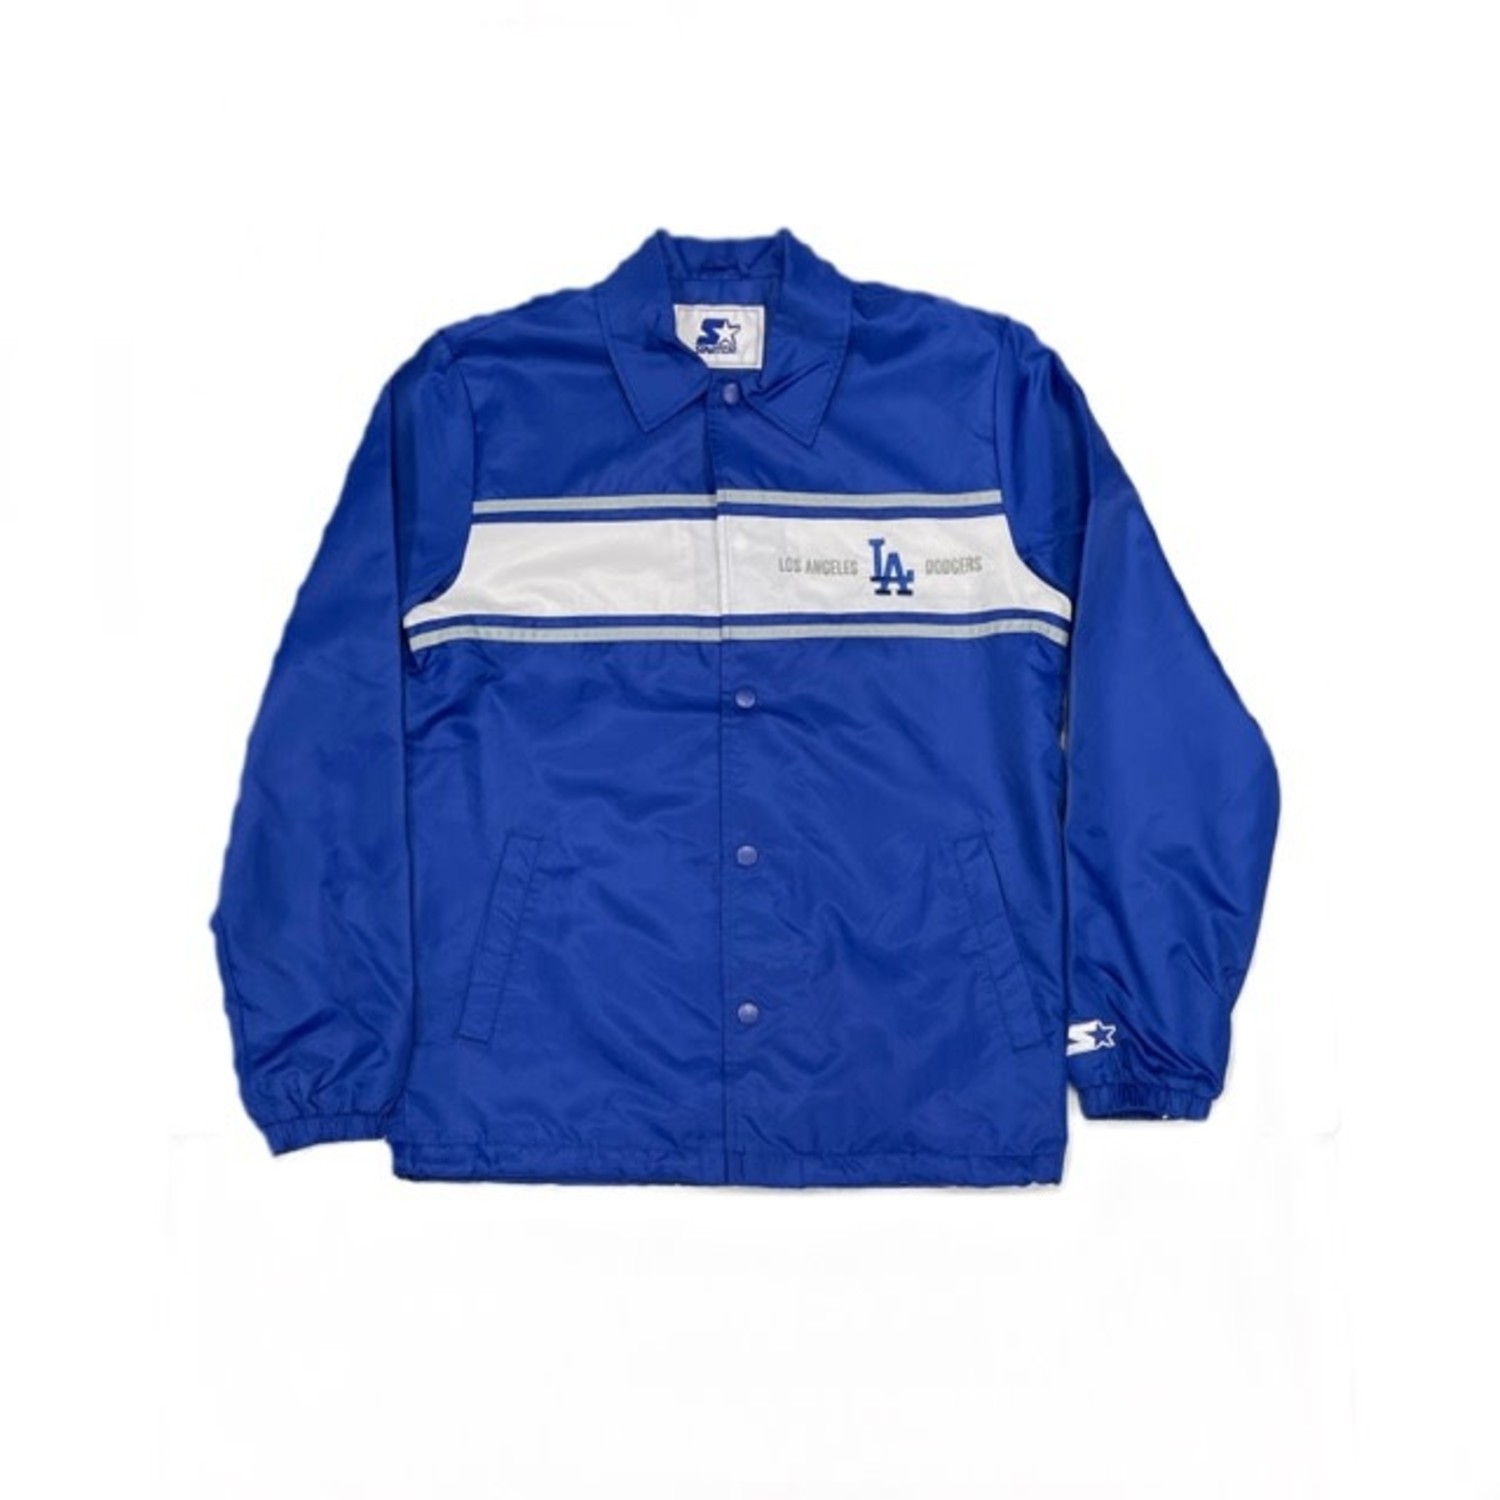 Dodgers M Starter The First Down Coach Jacket - The Locker Room of Downey